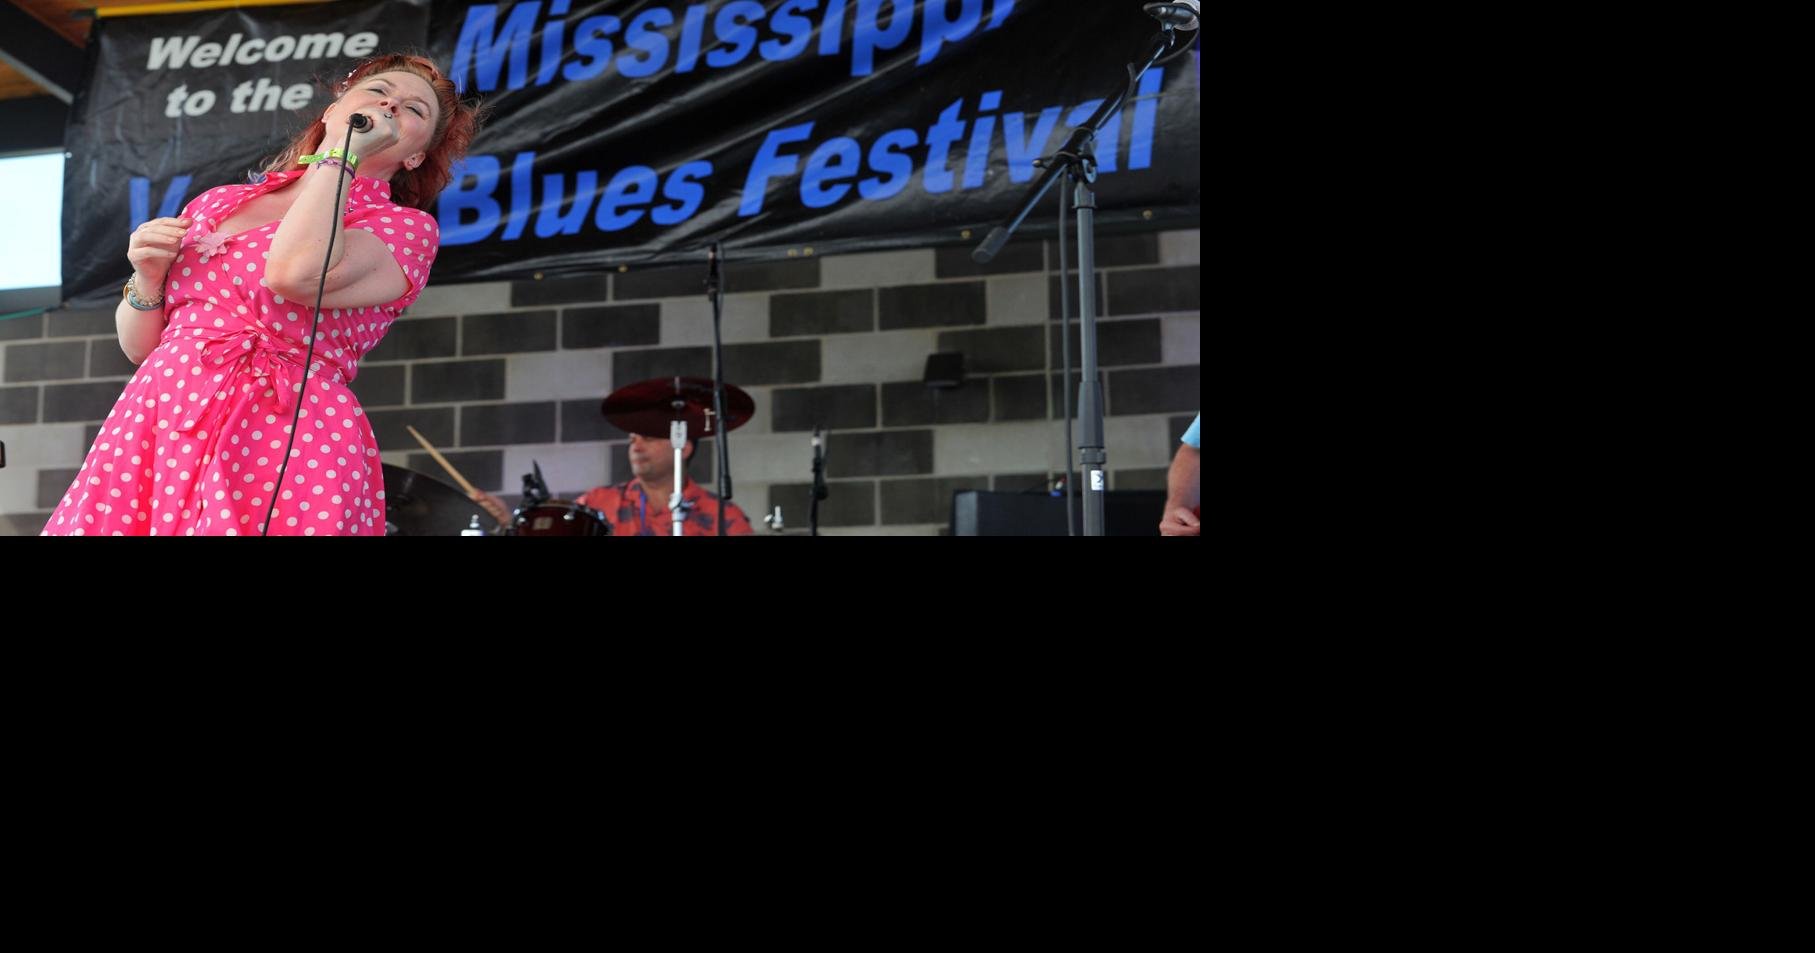 Mississippi Valley Blues Festival is coming back too